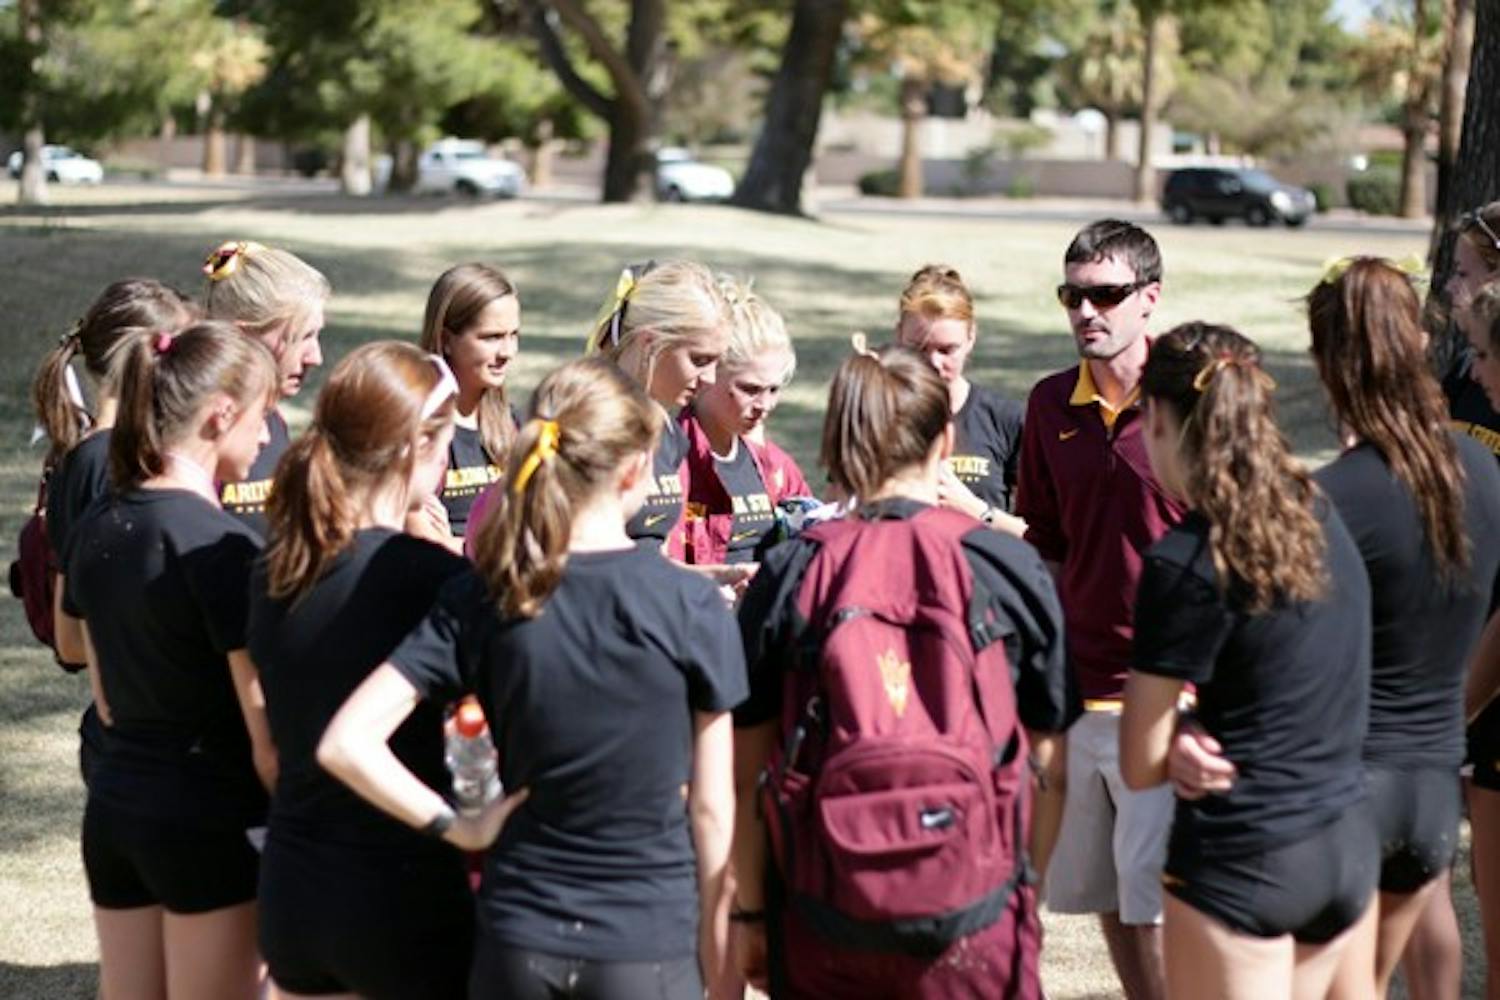 ASU women’s cross-country coach Ryan Cole talks with his team after the Pac-12 championships in October. The team has reached the NCAA Nationals in his first season as coach, thanks to solid performances at the West Regional meet. (Photo by Beth Easterbrook)